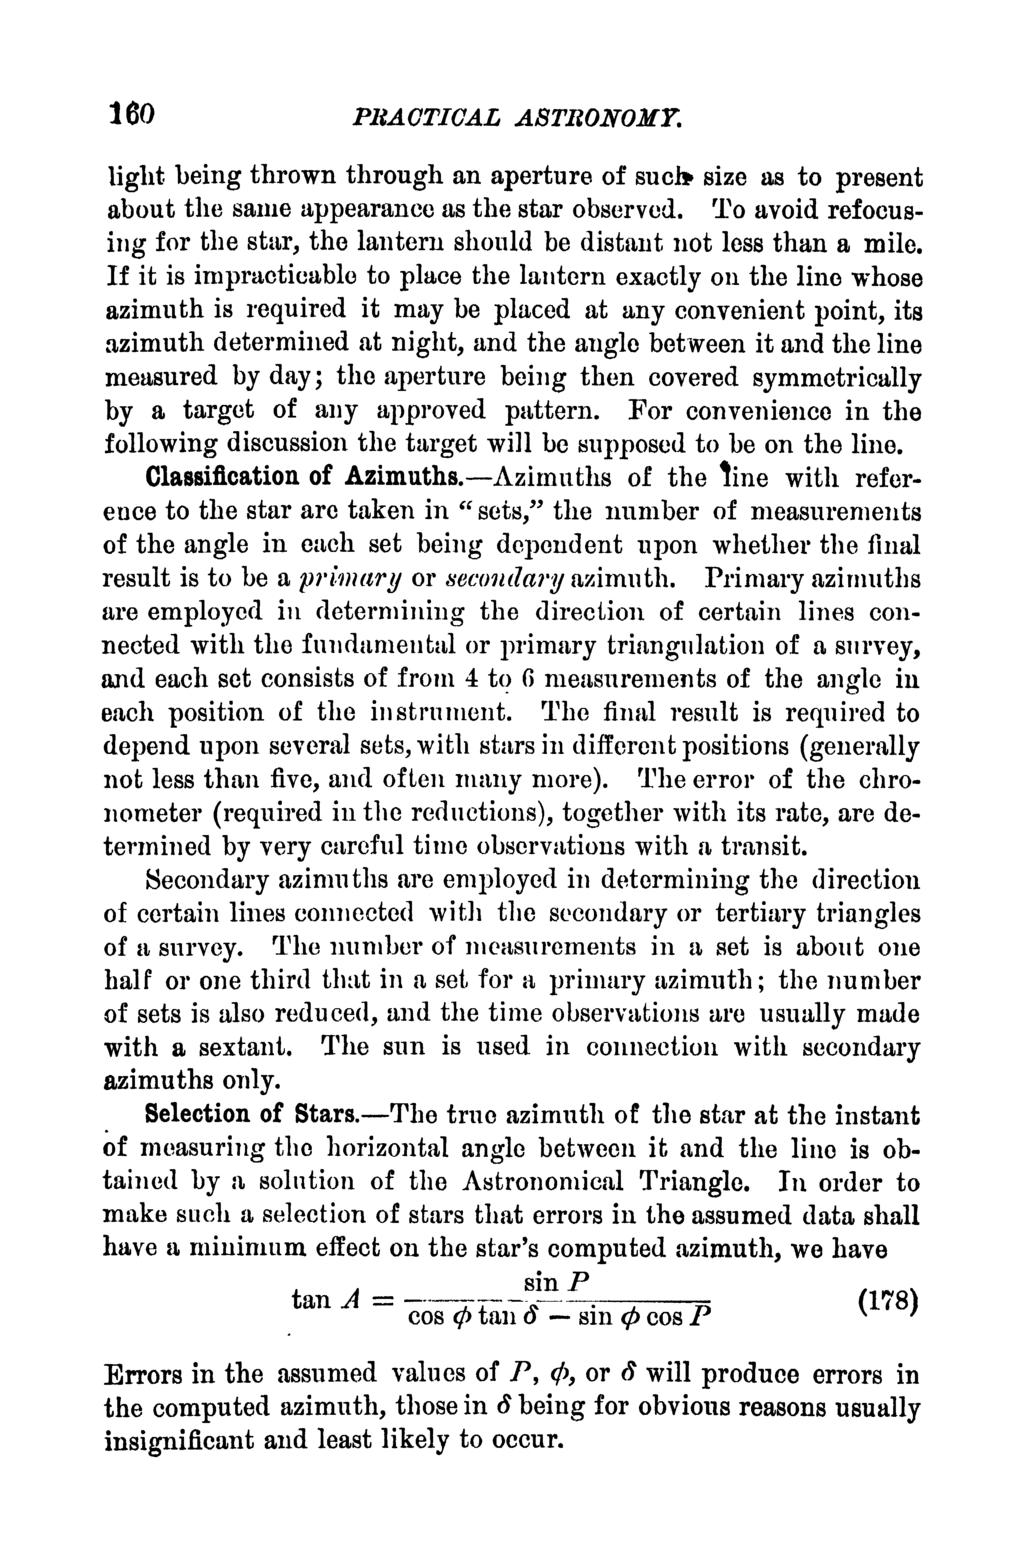 160 PRACTICAL ASTRONOMY. light being thrown through an aperture of such* size as to present about the same appearance as the star observed.